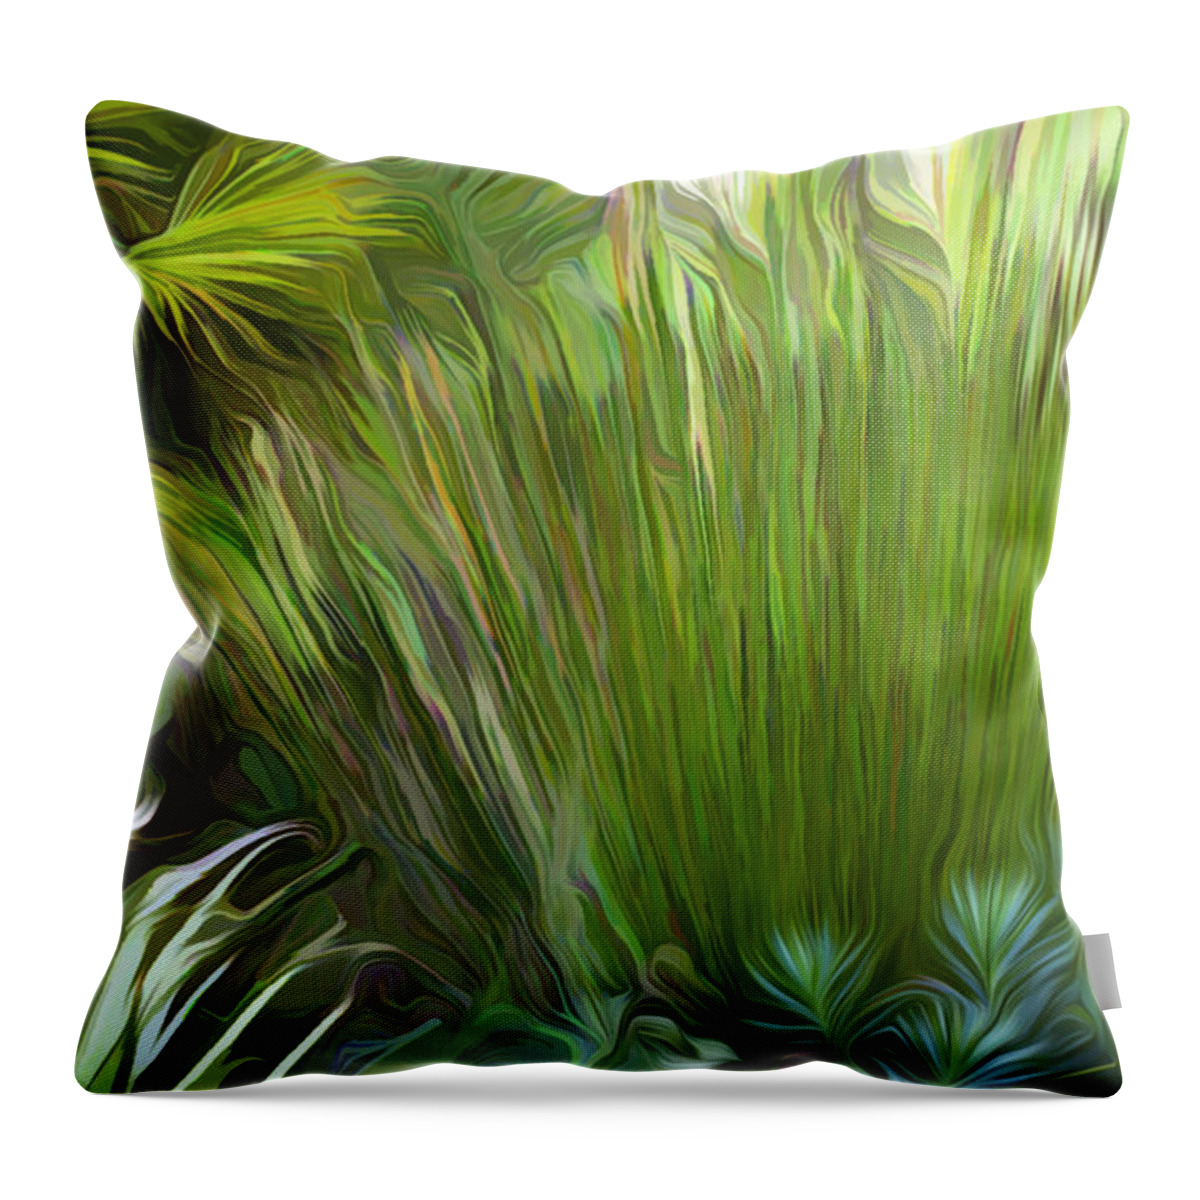 Foliage Throw Pillow featuring the photograph Cape Rush Grass Exploding by Saxon Holt